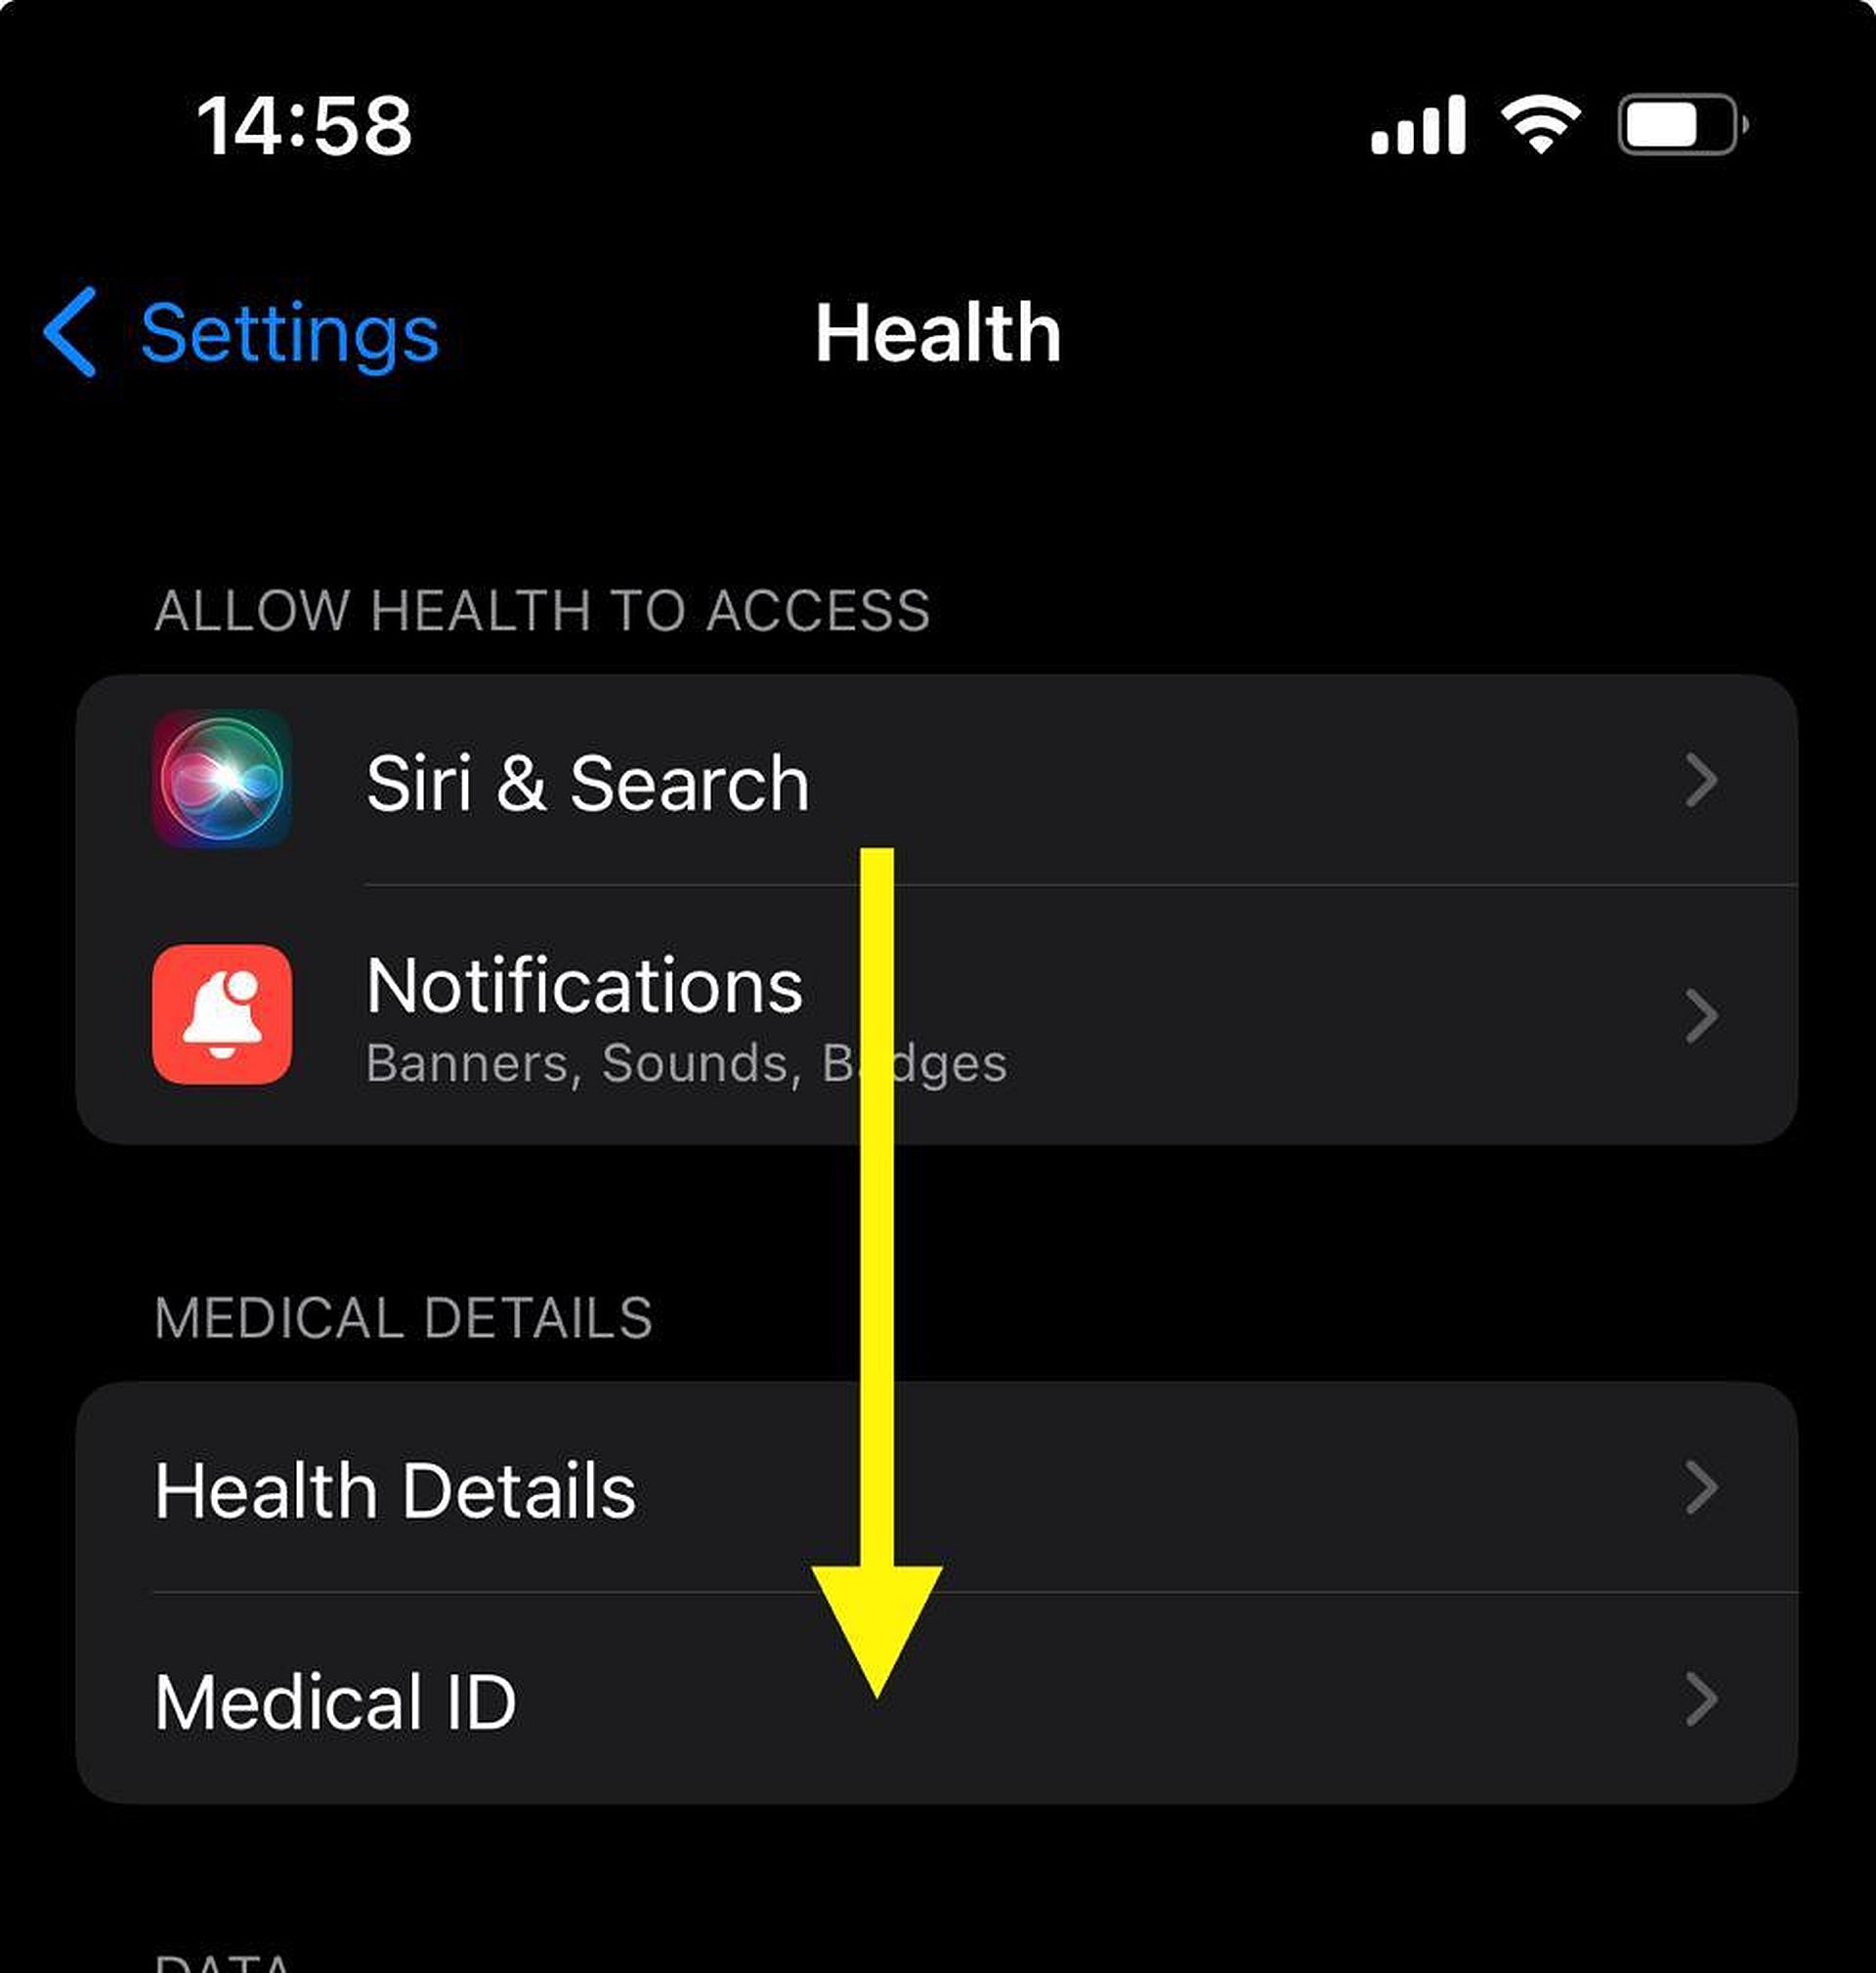 How to edit Medical ID on iPhone by using the Health App